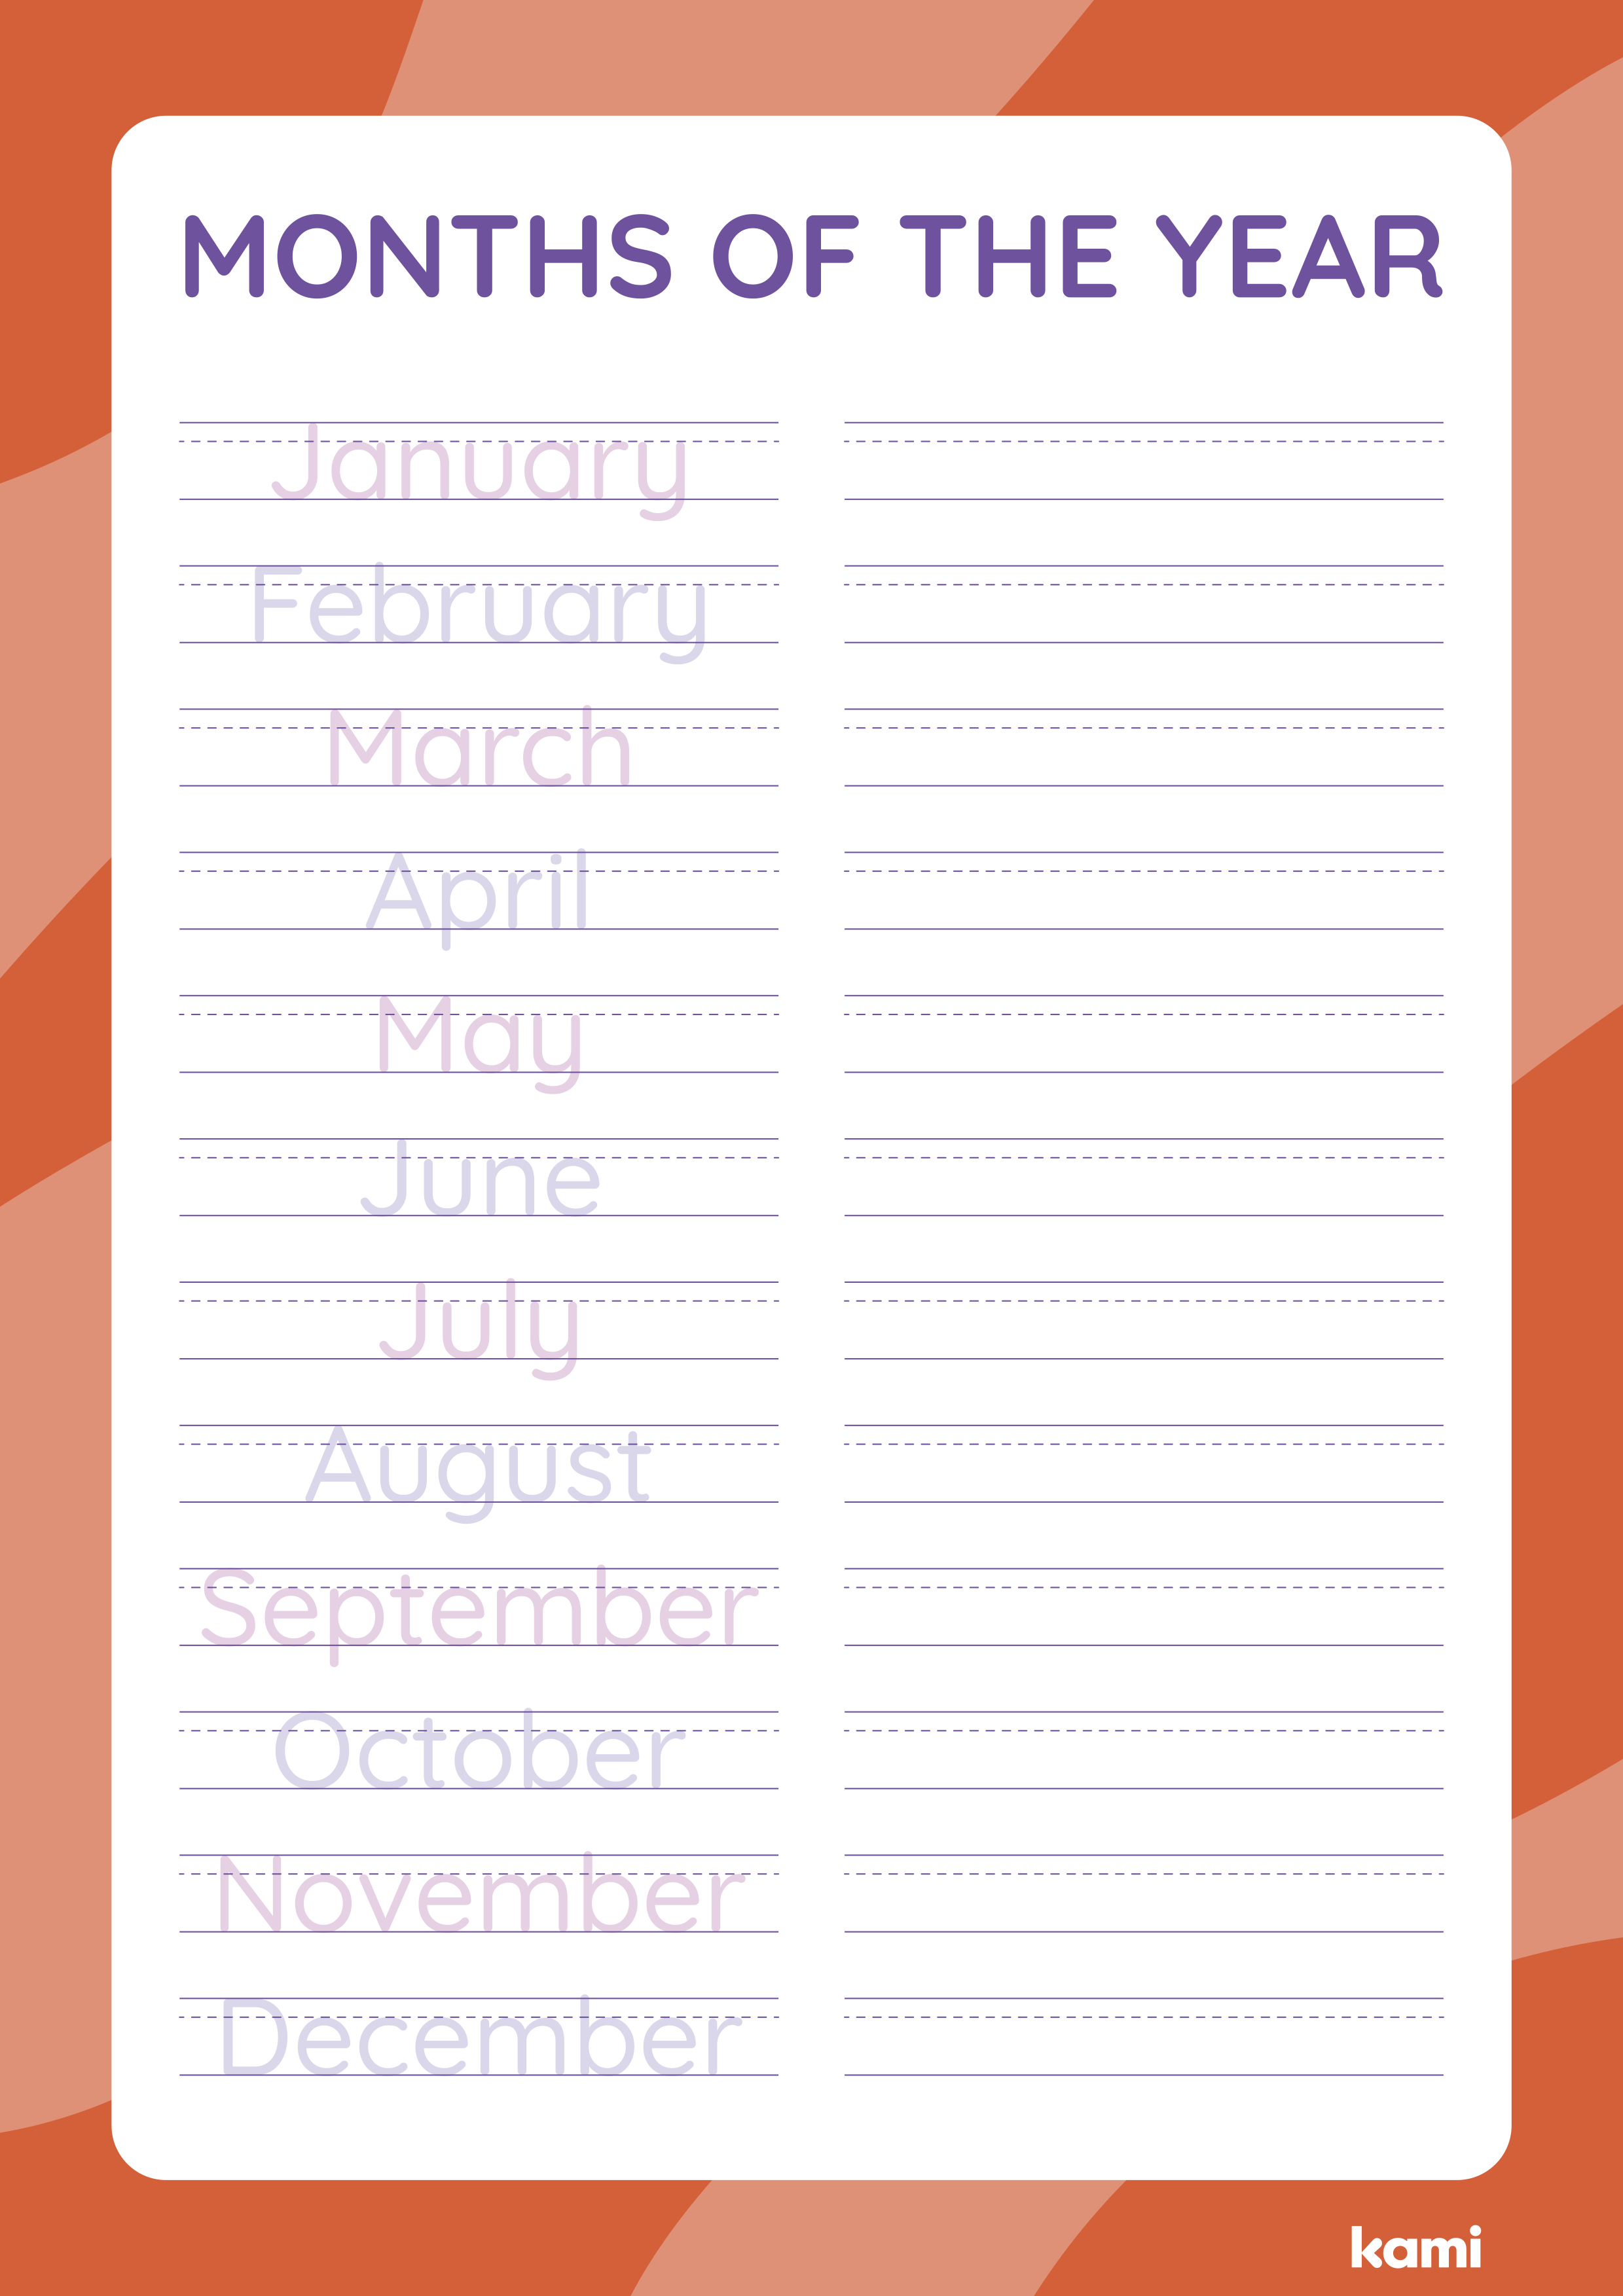 A handwriting columns worksheet for Pre-K - 1st graders with a months of the year theme